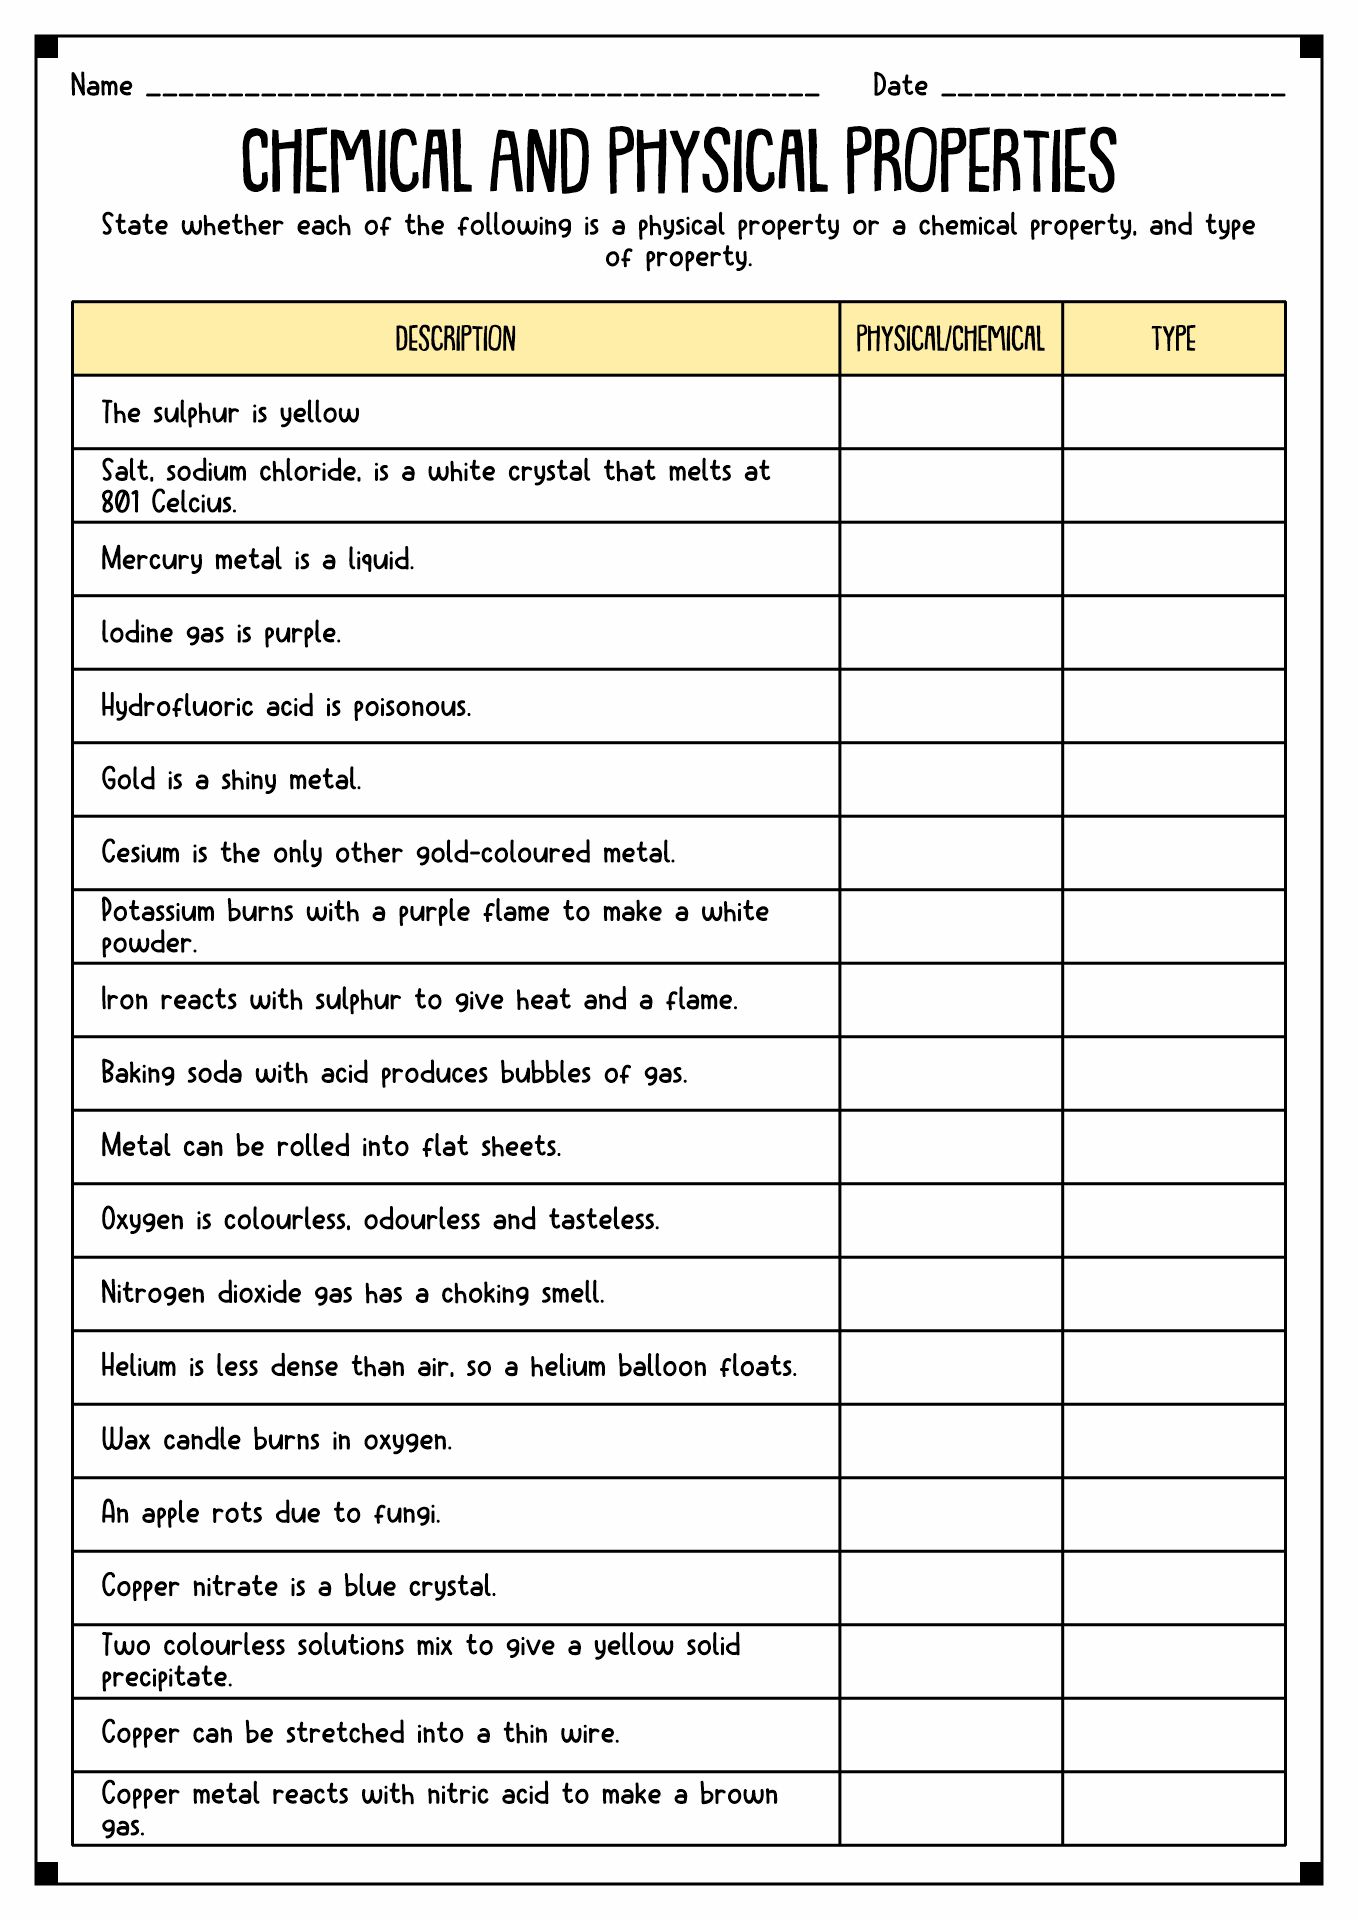 physical-chemical-properties-changes-worksheet